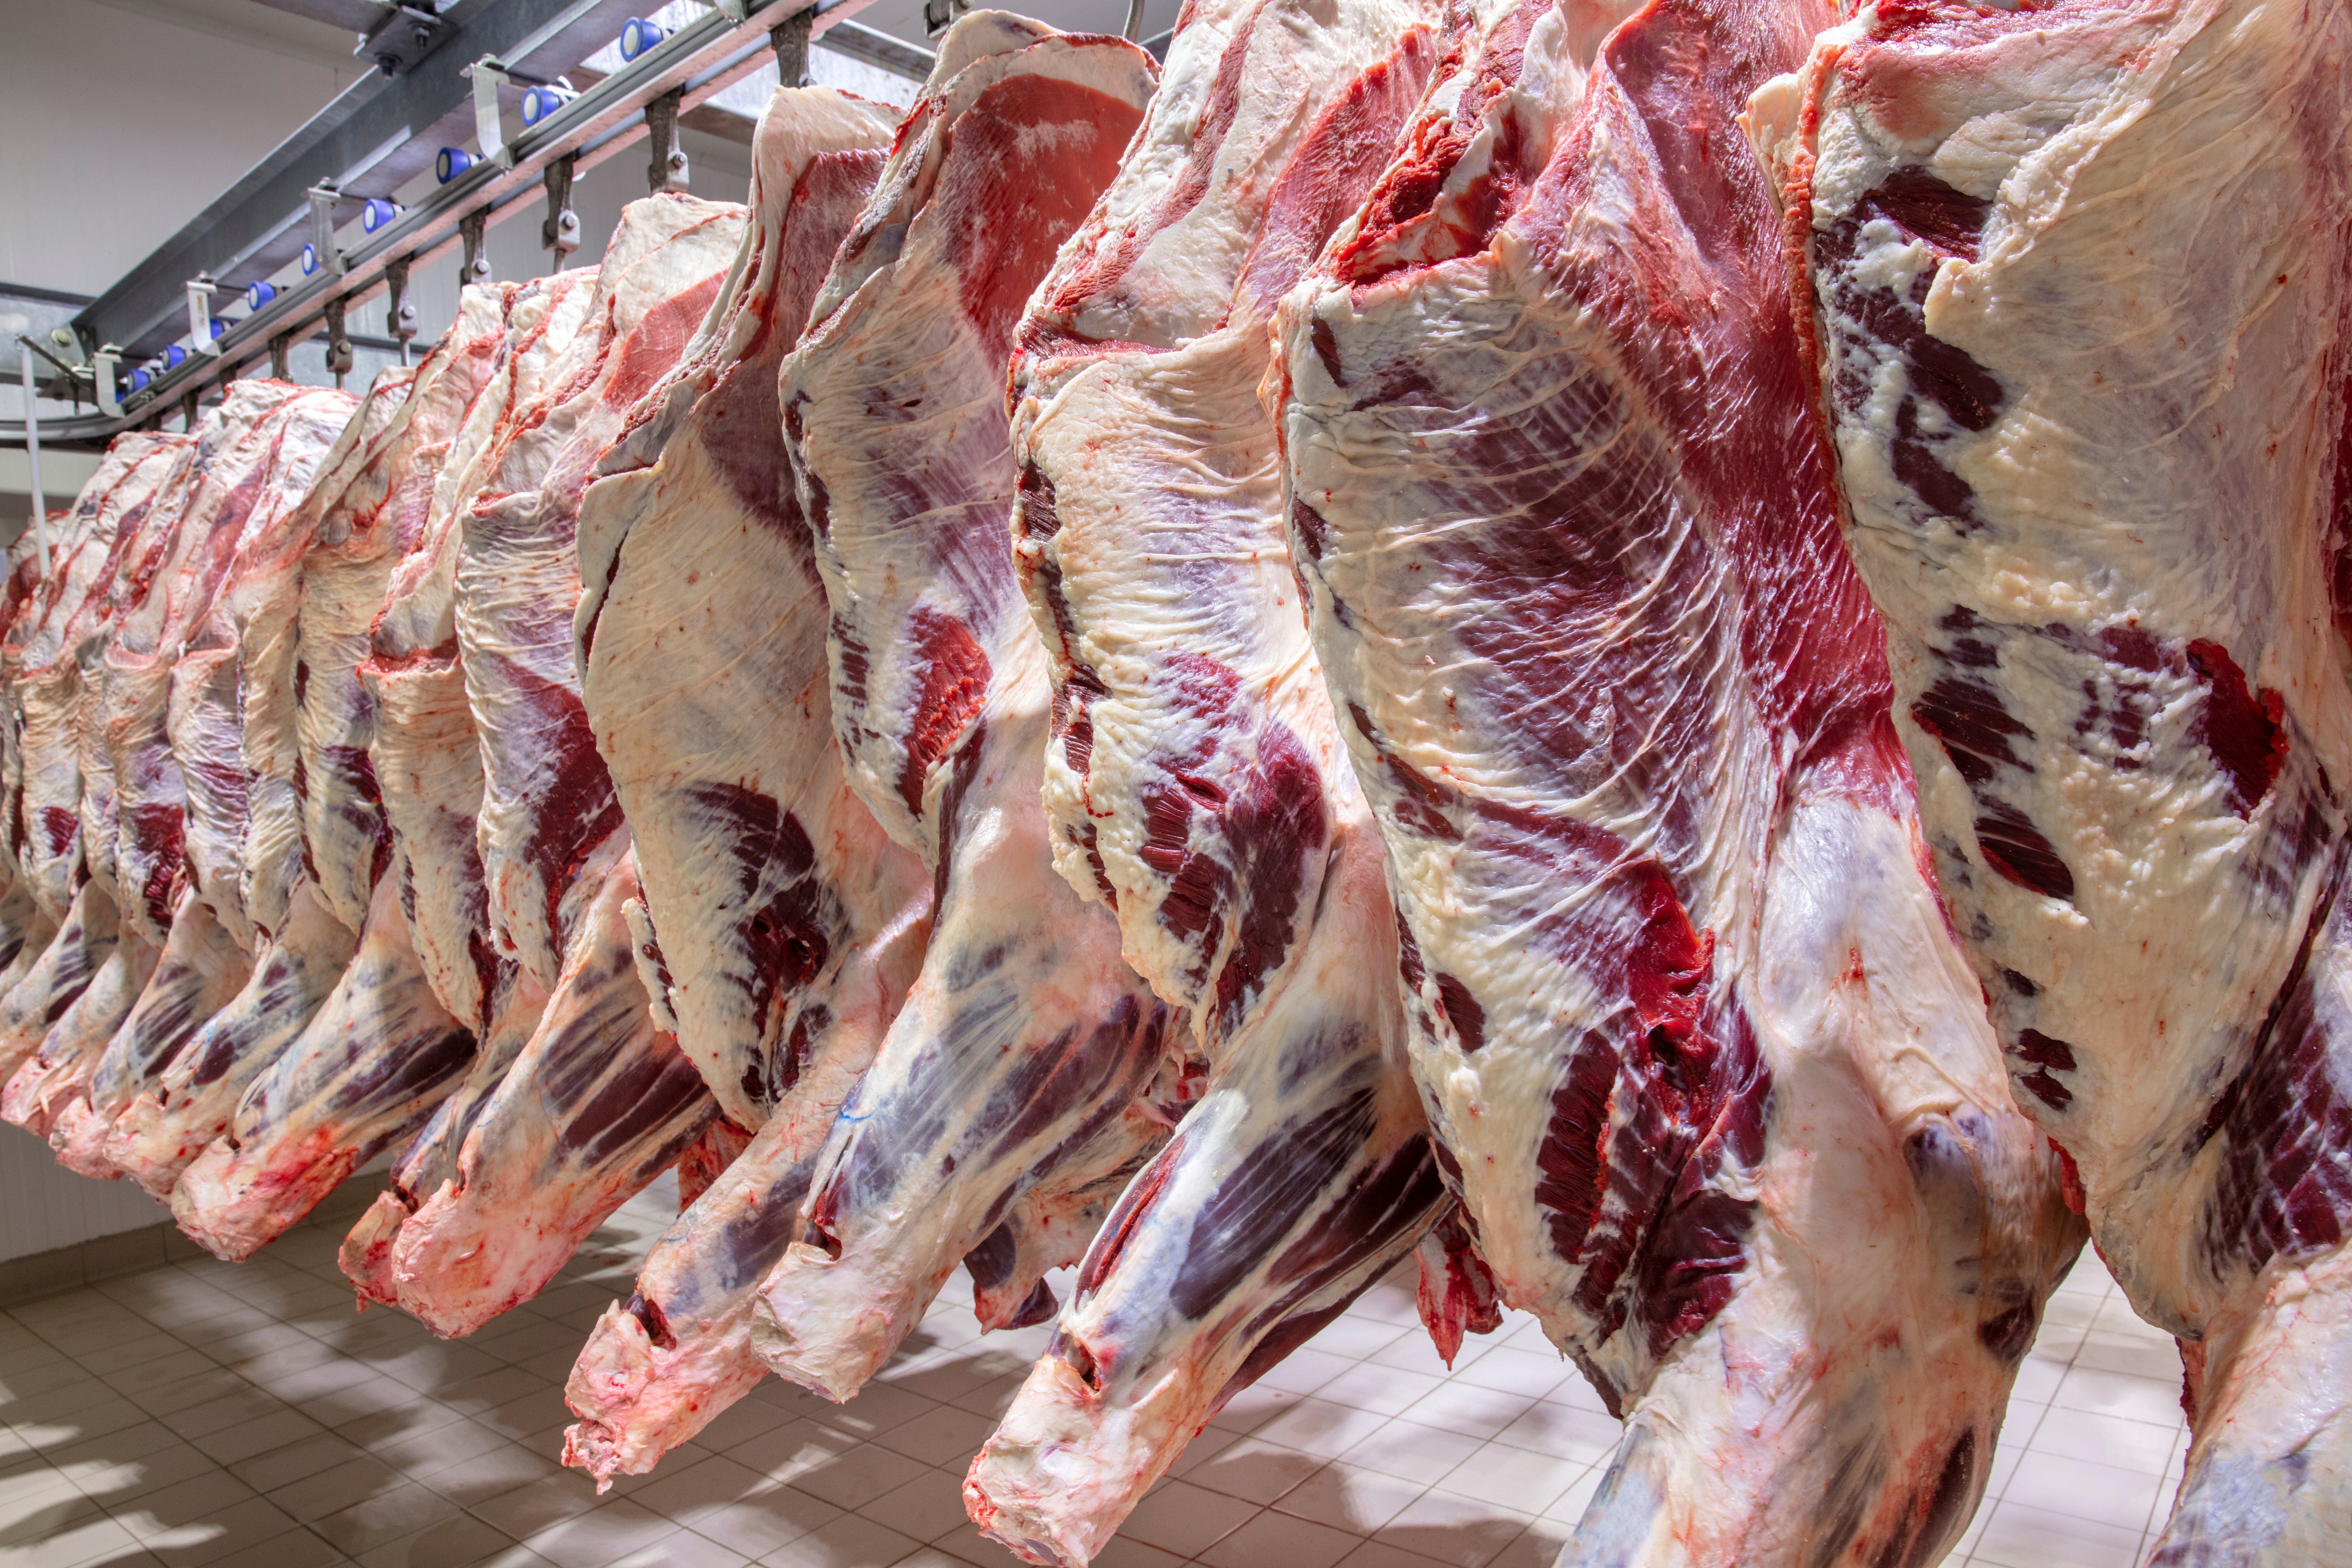 More Disruptions In Meat Processing